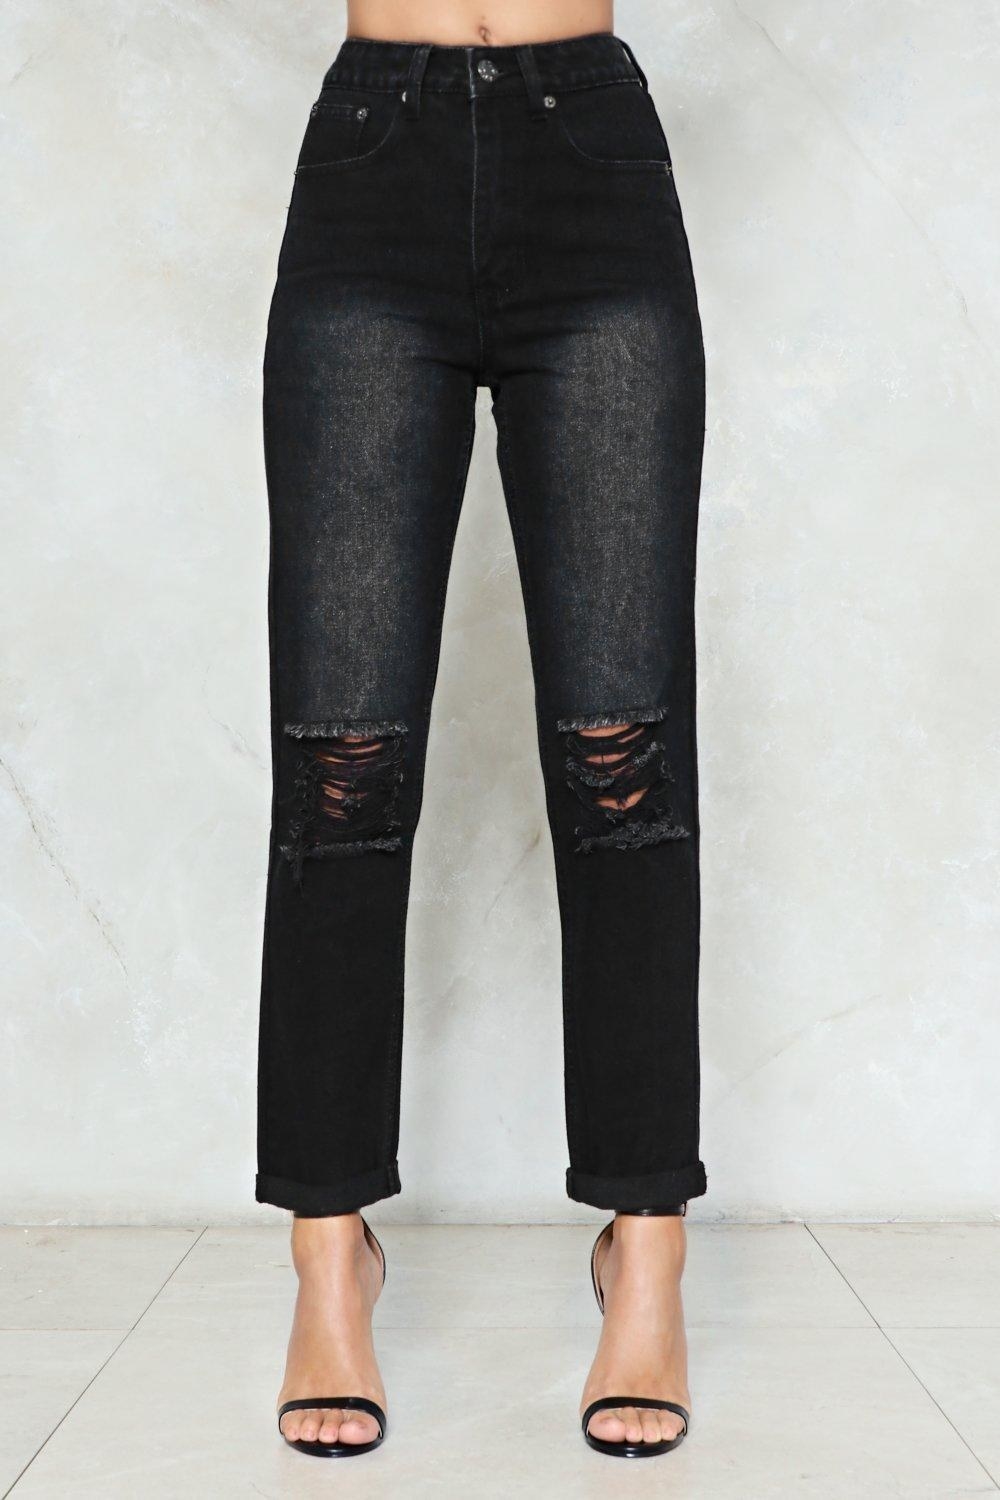 22 Pairs Of High-Waisted Jeans You'll Want To Live In